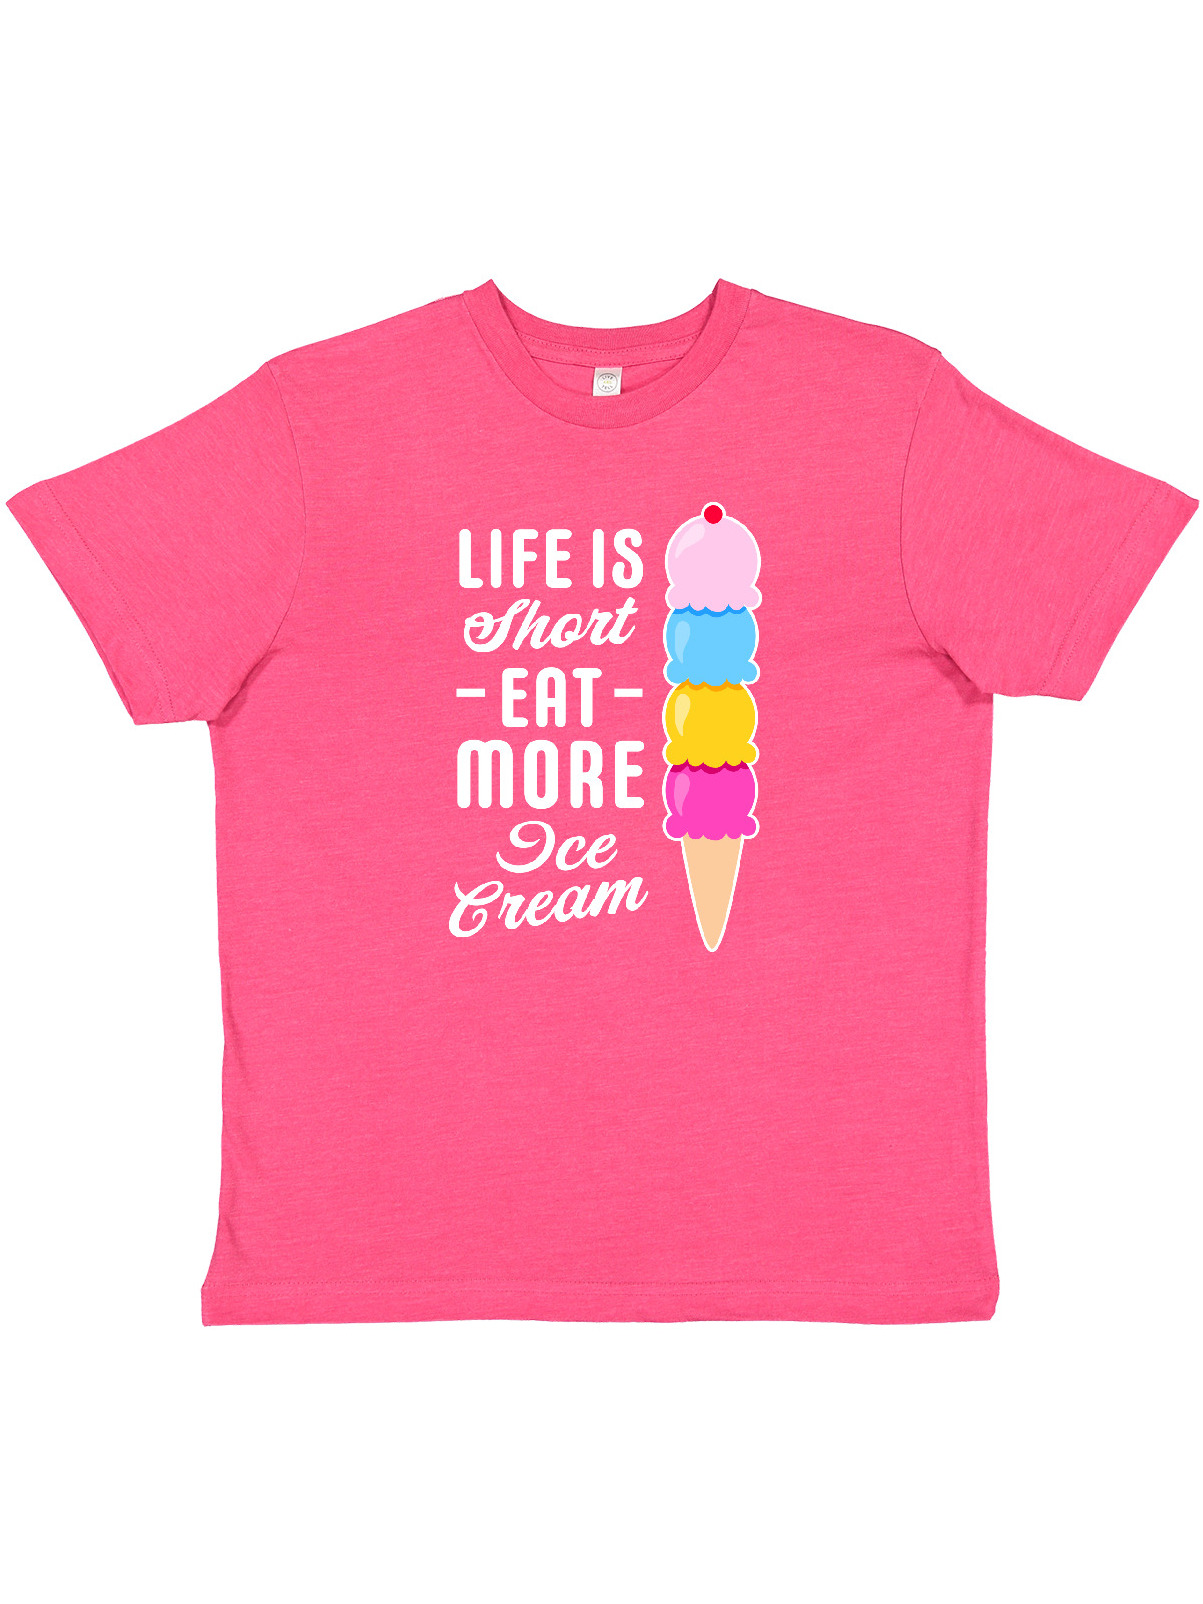 Inktastic Life is Short Eat More Ice Cream Youth T-Shirt - image 1 of 4